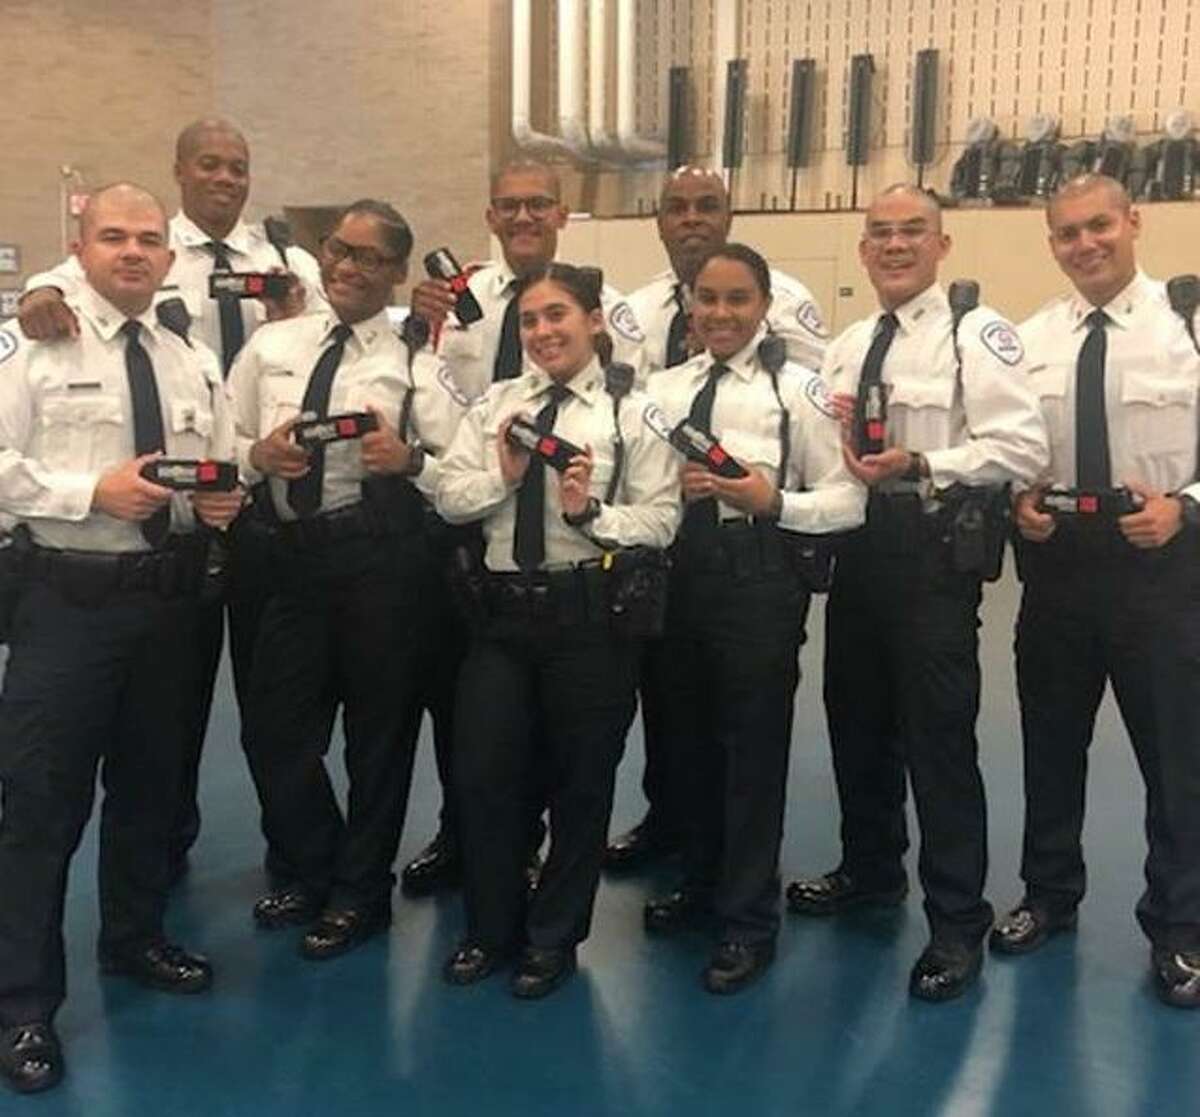 Members from the Houston Police Academy Cadet Class 239 received tourniquets from Memorial Hermann as part of their training on how to use the life-saving tool.